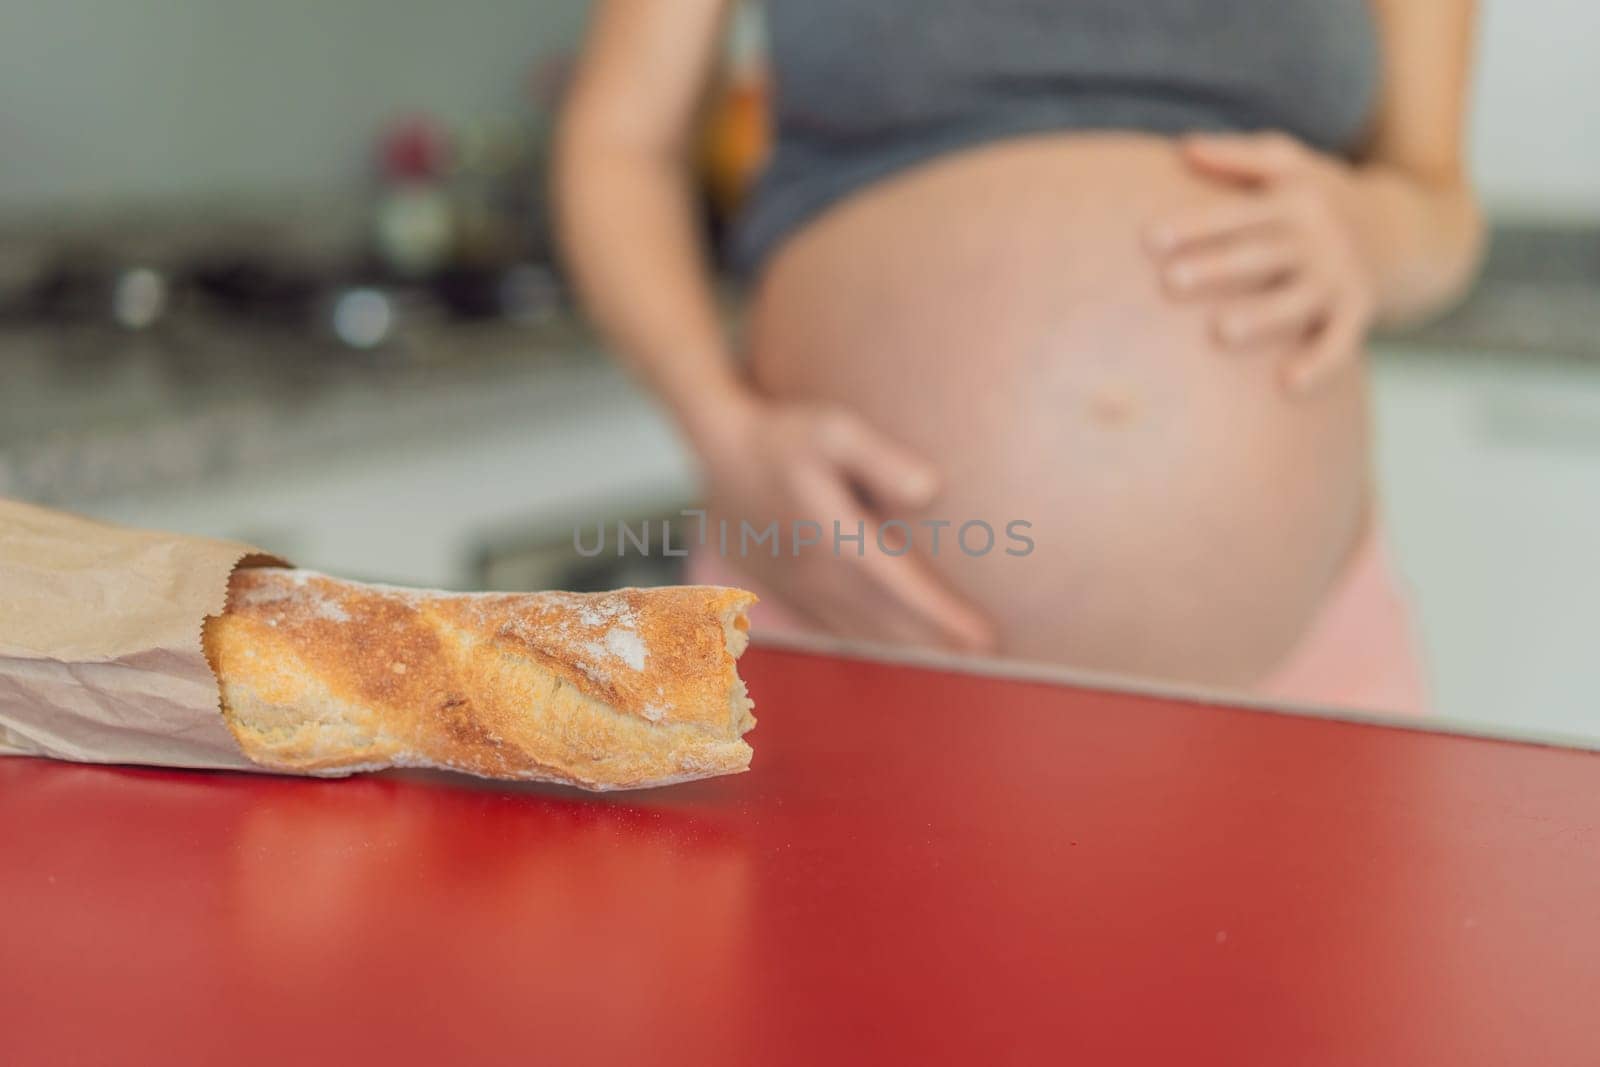 Pregnant woman eating bread in the kitchen. Exploring the impact of gluten during pregnancy: understanding the potential benefits and risks for maternal health and fetal development by galitskaya